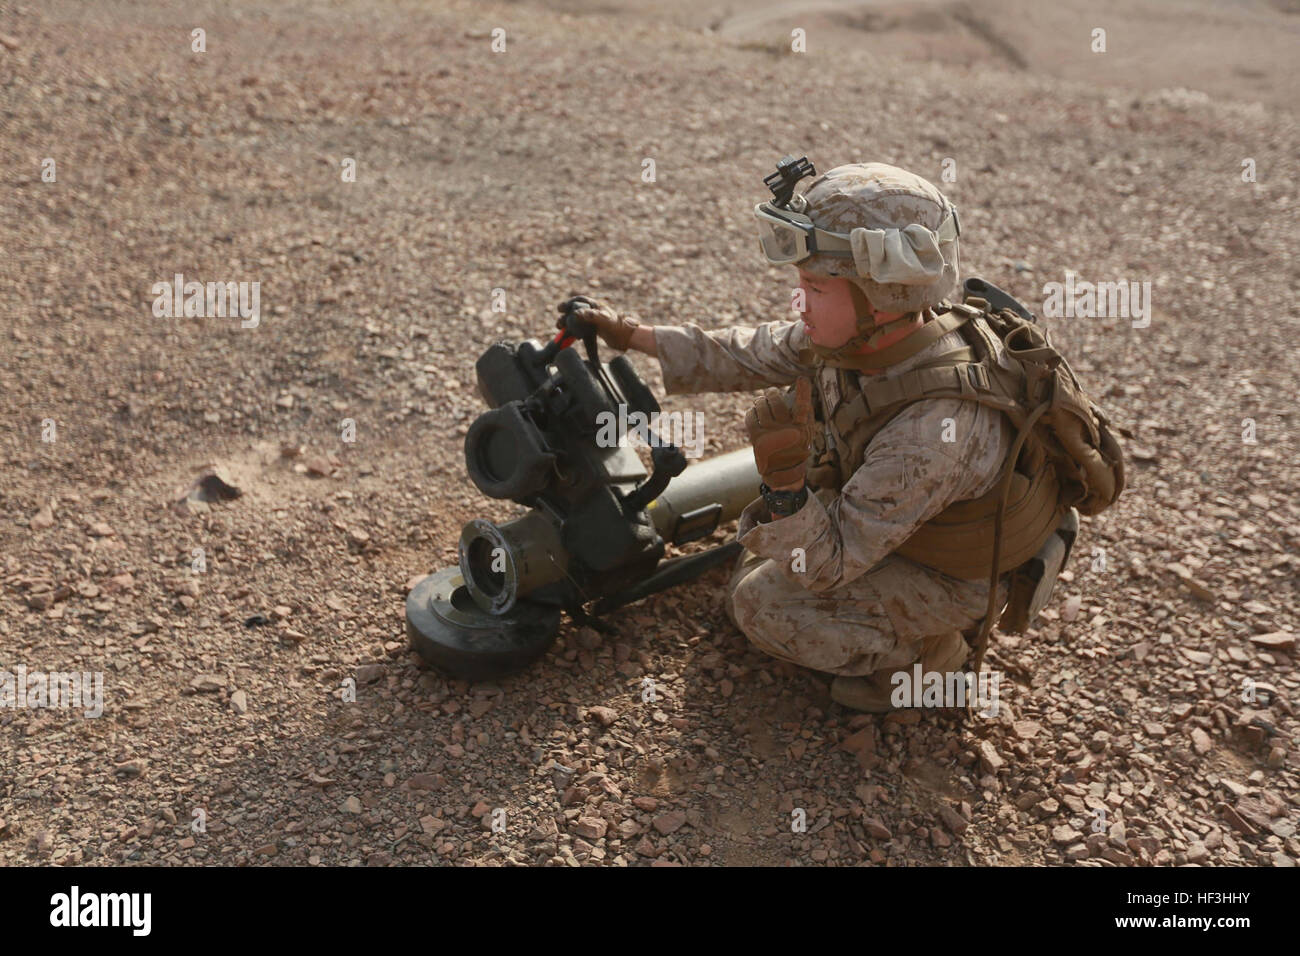 ARTA BEACH, Djibouti (July 28, 2015) U.S. Marine Lance Cpl. Steven Benavidez prepares a Javelin shoulder-fired anti-tank missile system for use during sustainment training. Benavidez is a scout with Combined Anti-Armor Team 1, Weapons Company, Battalion Landing Team 3rd Battalion, 1st Marine Regiment, 15th Marine Expeditionary Unit. Elements of the 15th MEU are ashore in Djibouti for sustainment training to maintain and enhance the skills they developed during their pre-deployment training period.  The 15th MEU is currently deployed in support of maritime security operations and theater securi Stock Photo